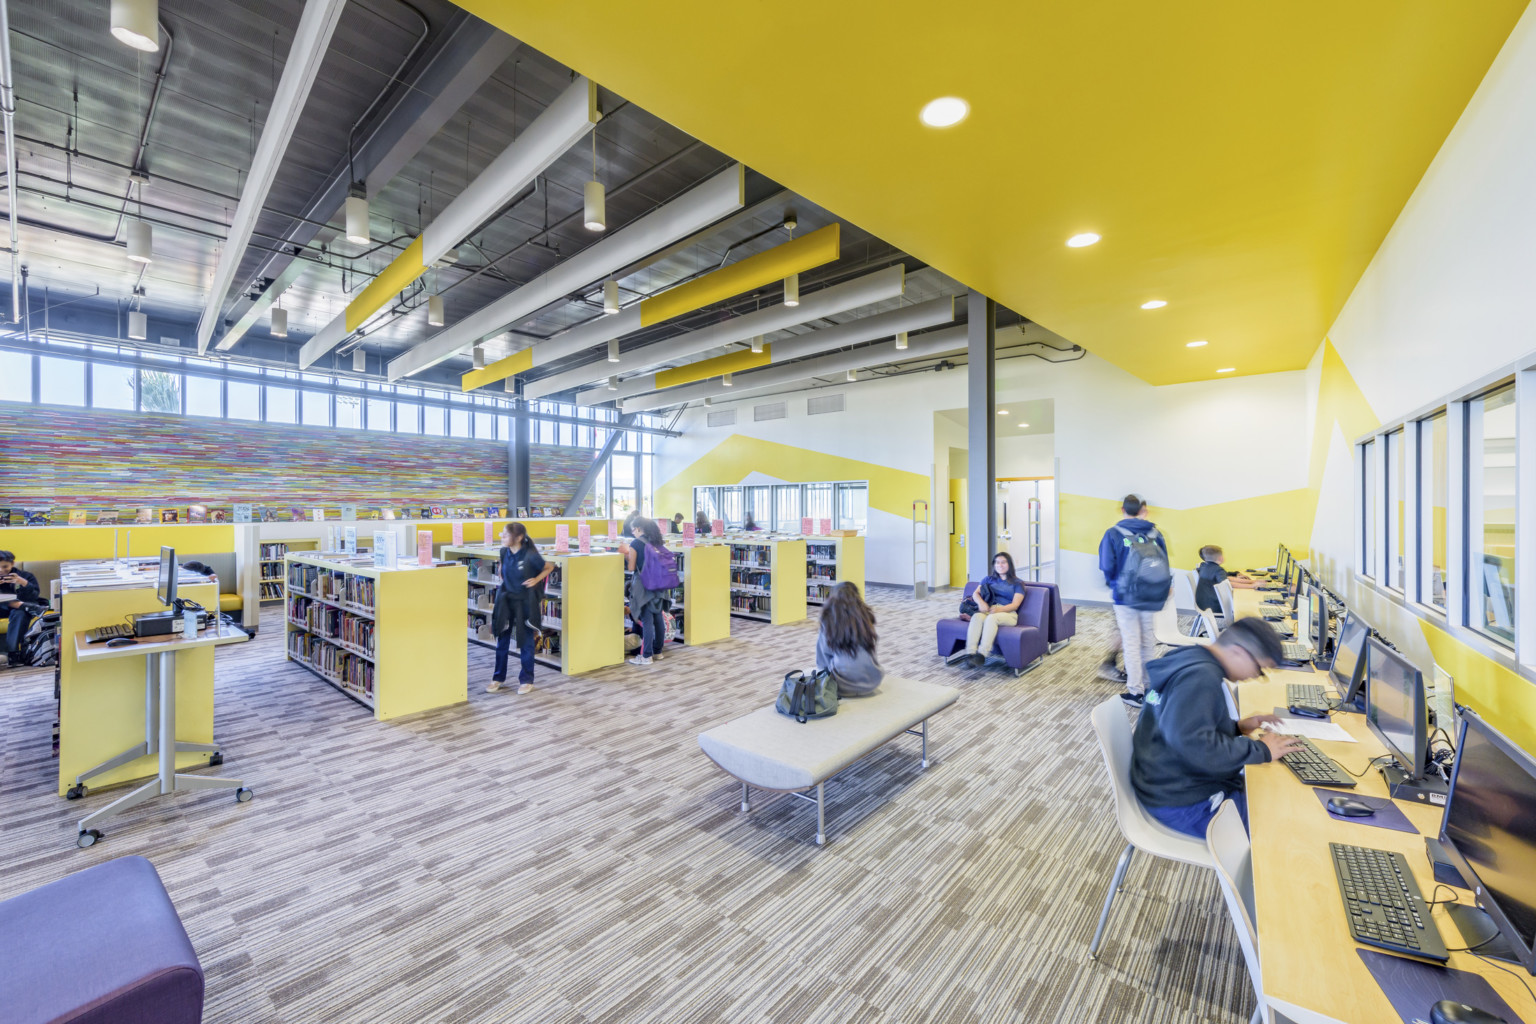 Yellow half height bookshelves in room with yellow stripes on white wall and colorful abstract pattern, left. Computers right